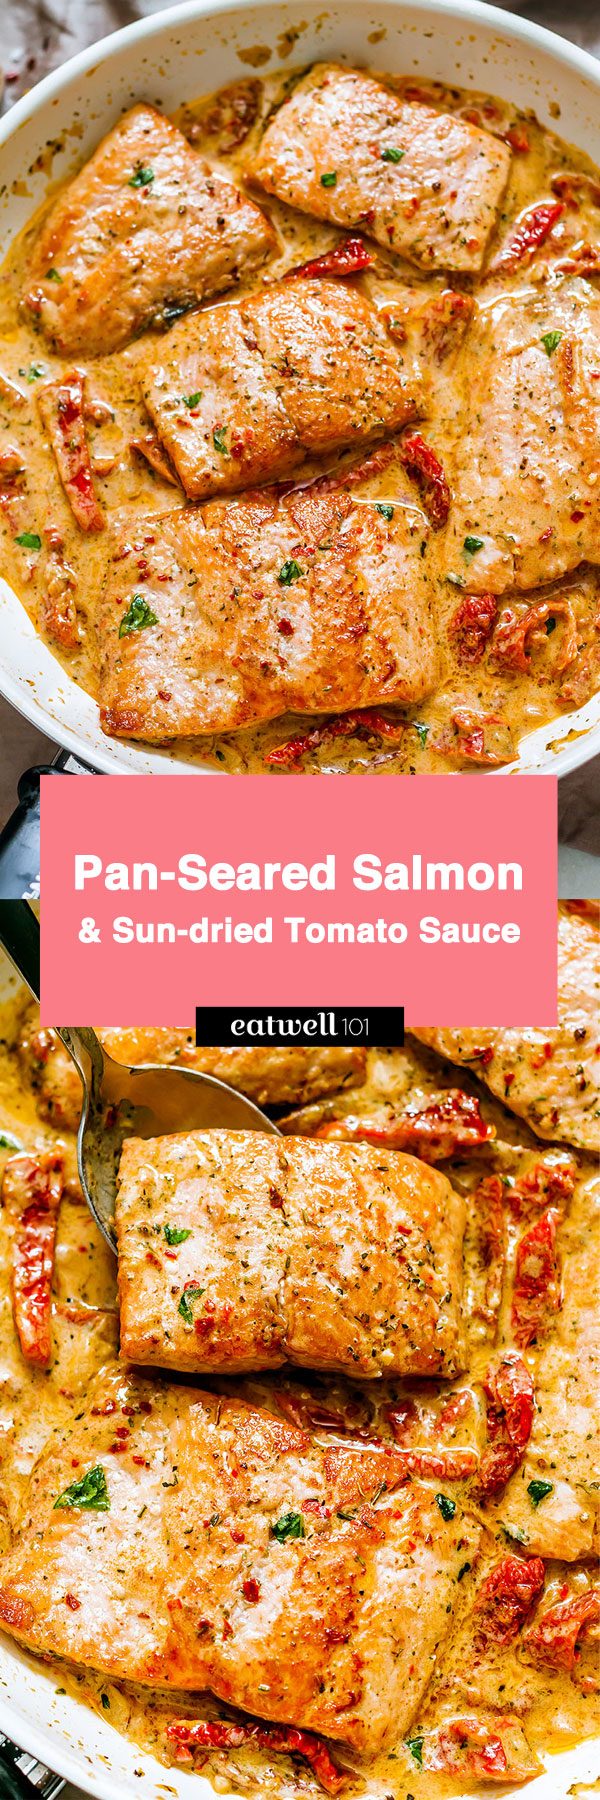 Pan Seared Salmon – #eatwell101 #recipe #salmon - The EASIEST, most FLAVORFUL salmon you will ever make.